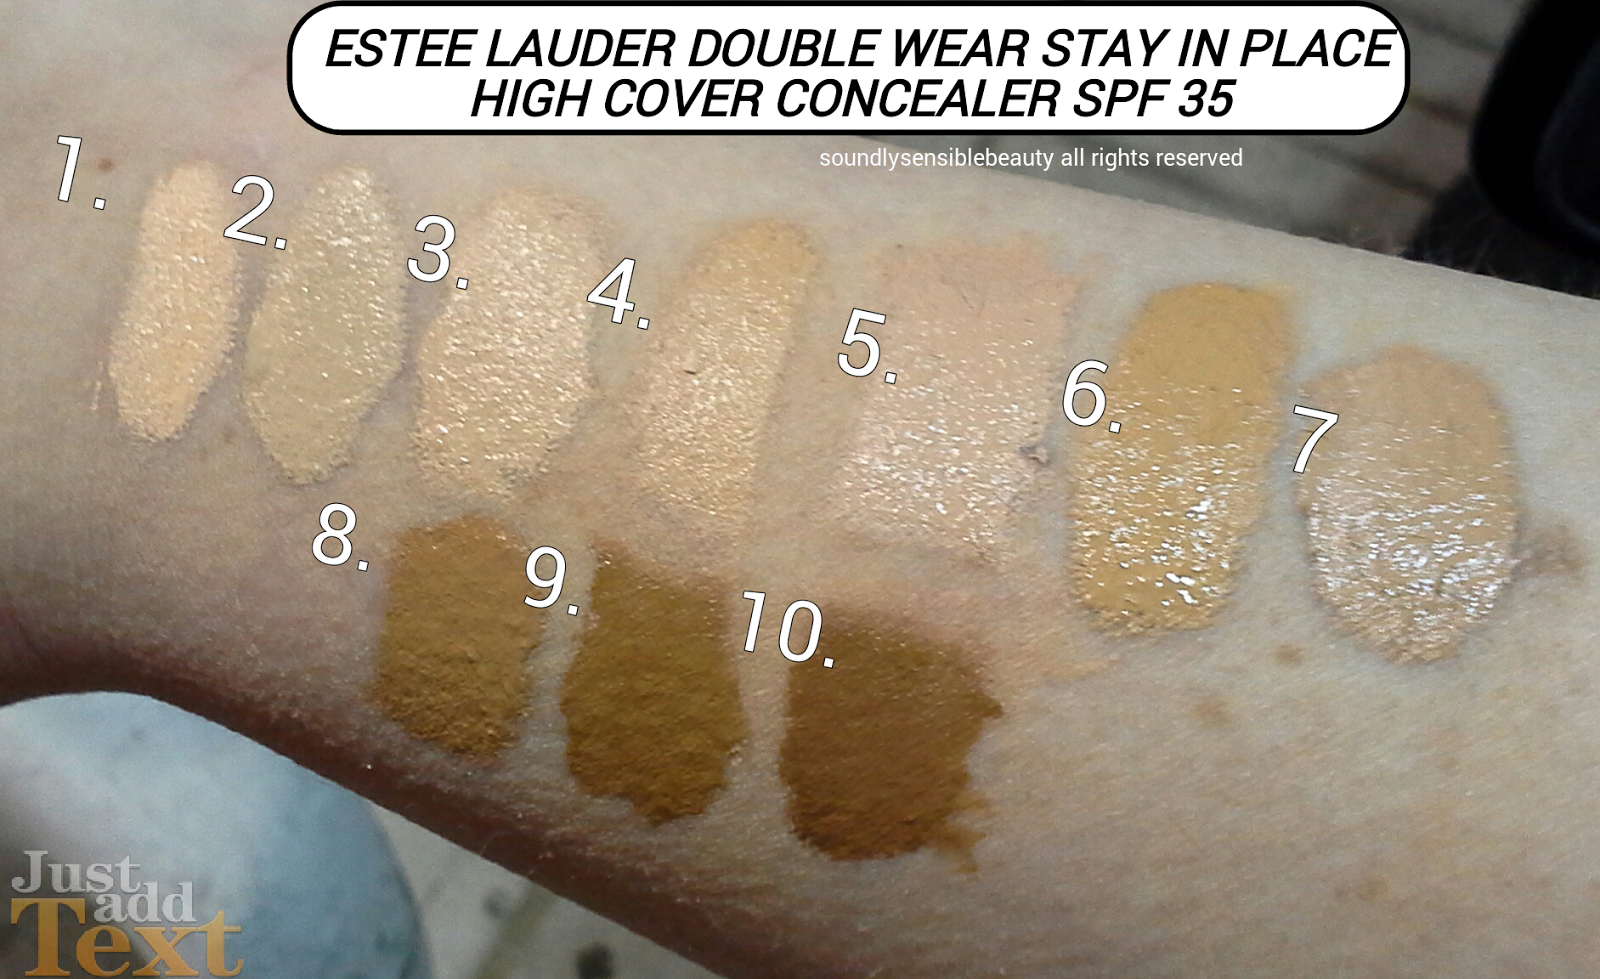 Estee Lauder Double Wear High Cover Concealer & Swatches of Shades